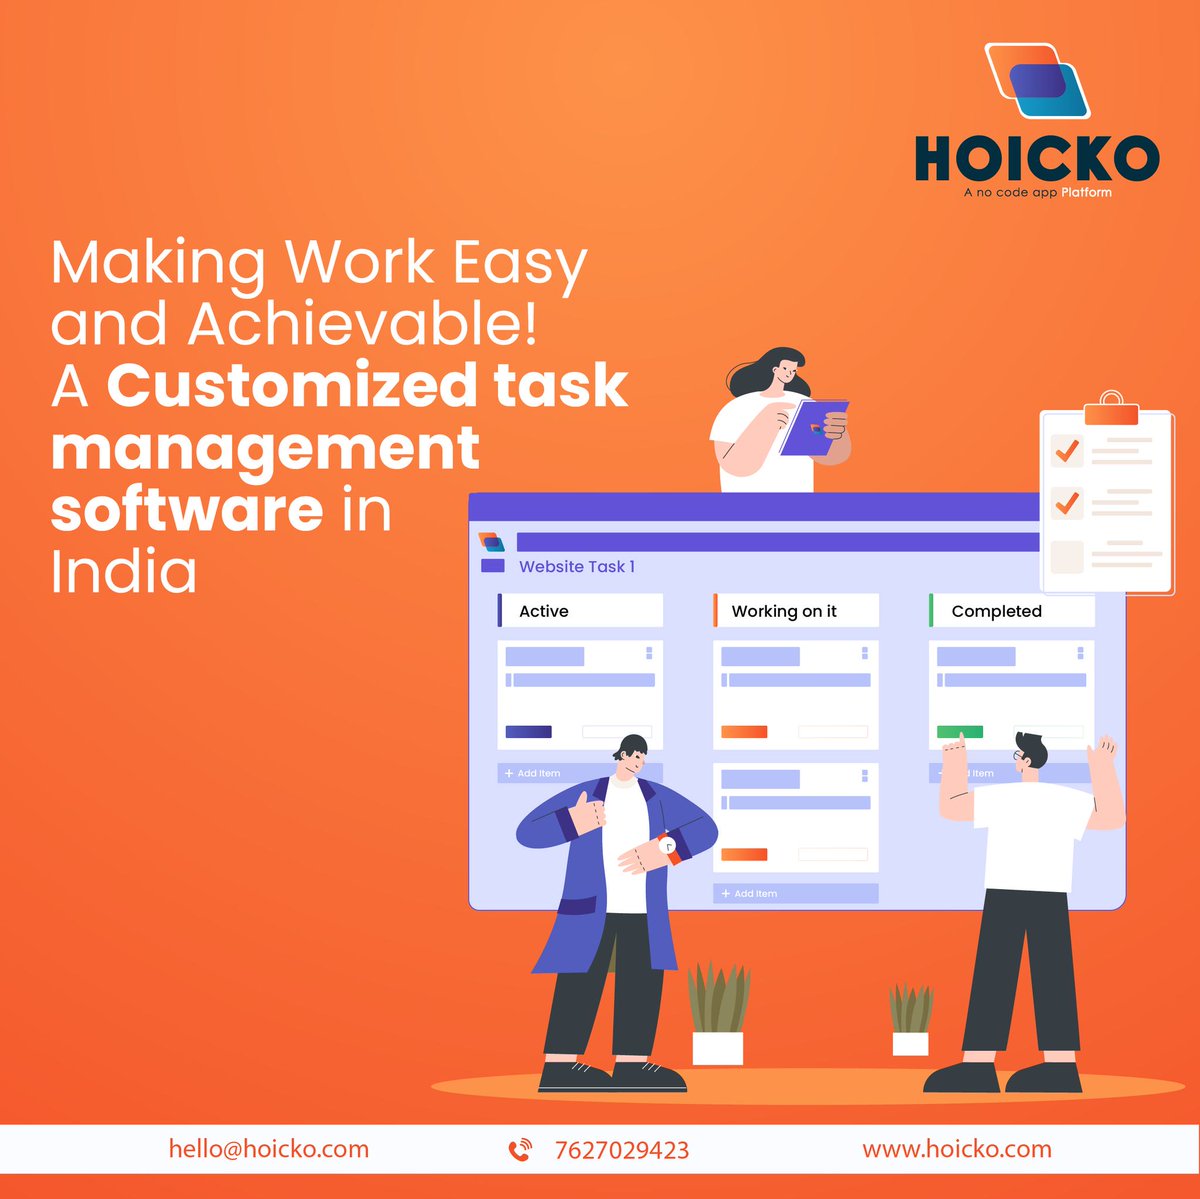 Making Work Easy and Achievable, your end to end #projectmanagement and #taskmanagementapp. 
Sign up #Hoicko!  customized #taskmanagementsoftware. #hoickotech #hoickonocodeapp #hoickotechnologies #performancemanagement #productivity  #teammanagement #teamwork